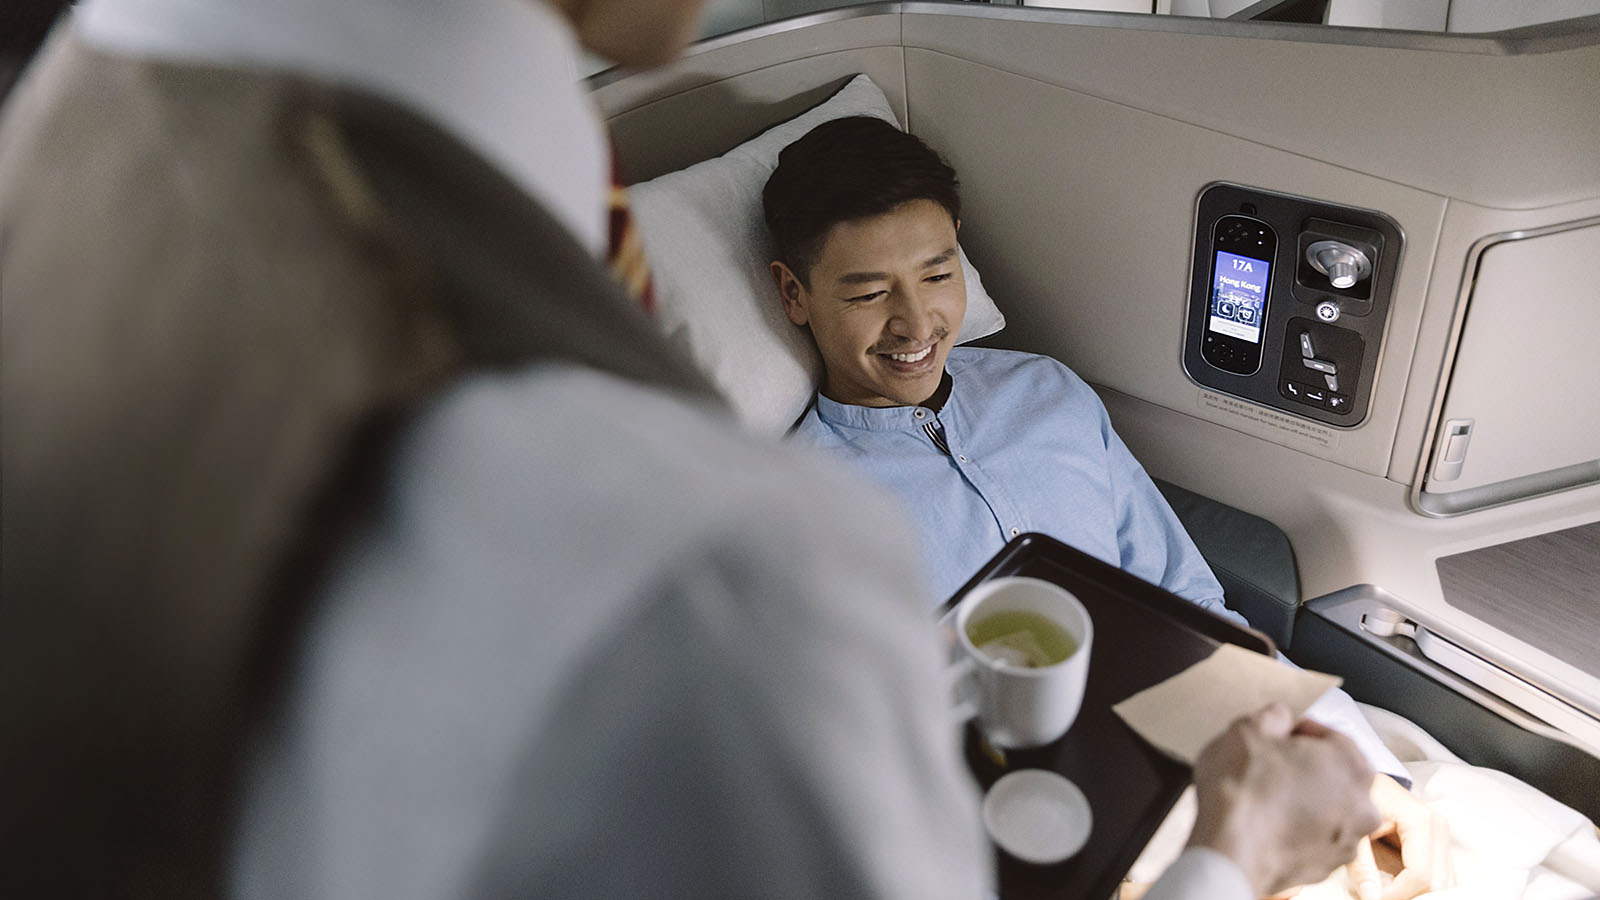 Upgrade on Cathay Pacific using miles